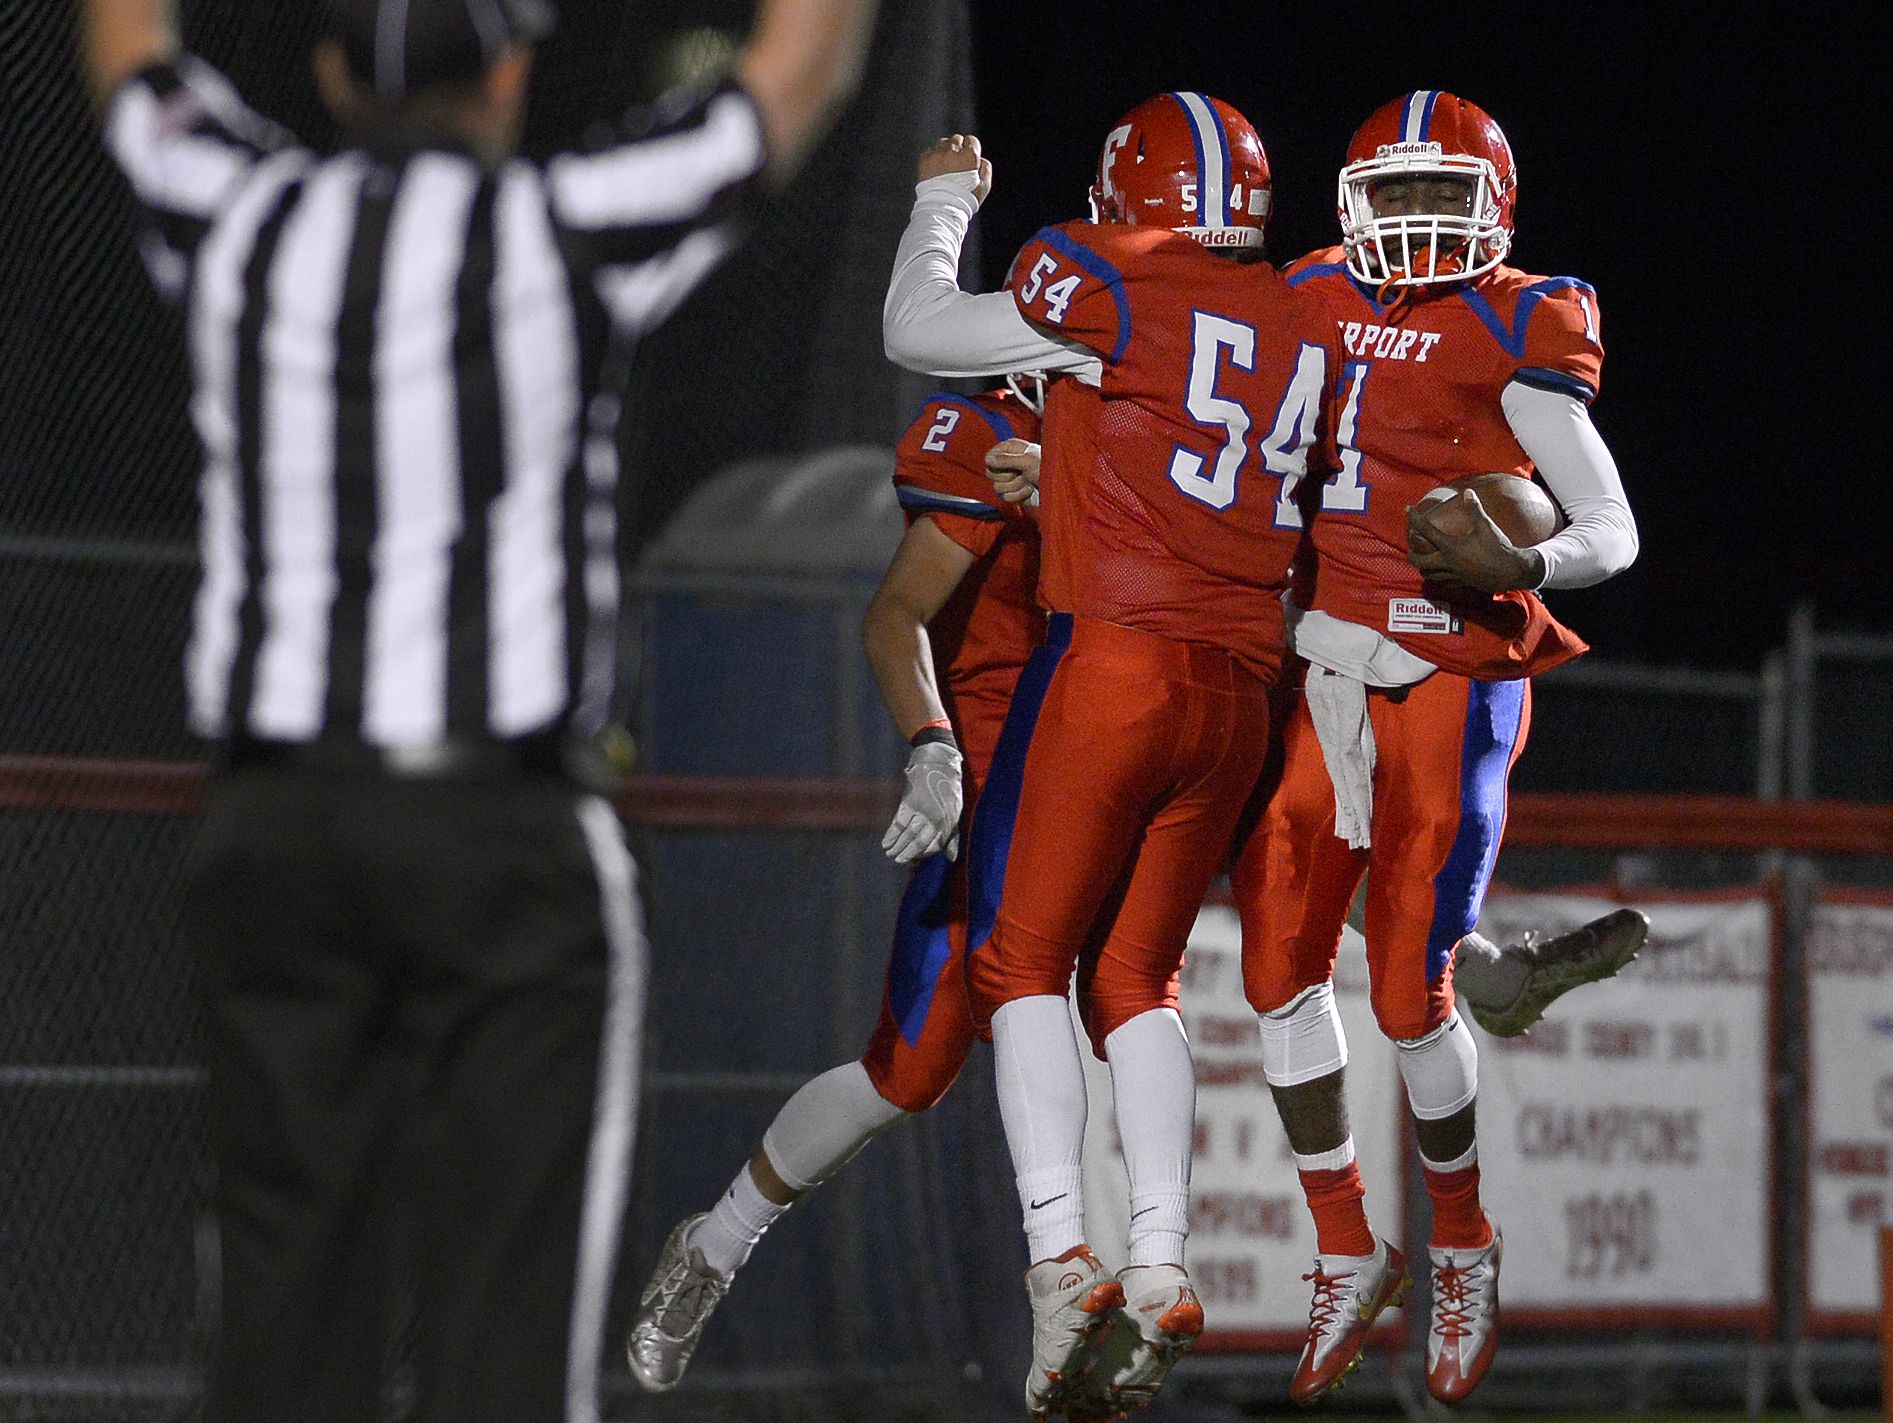 Fairport's Keshawn Howard, right, celebrates a touchdown run with teammate Mitch Disanto during the regular season.